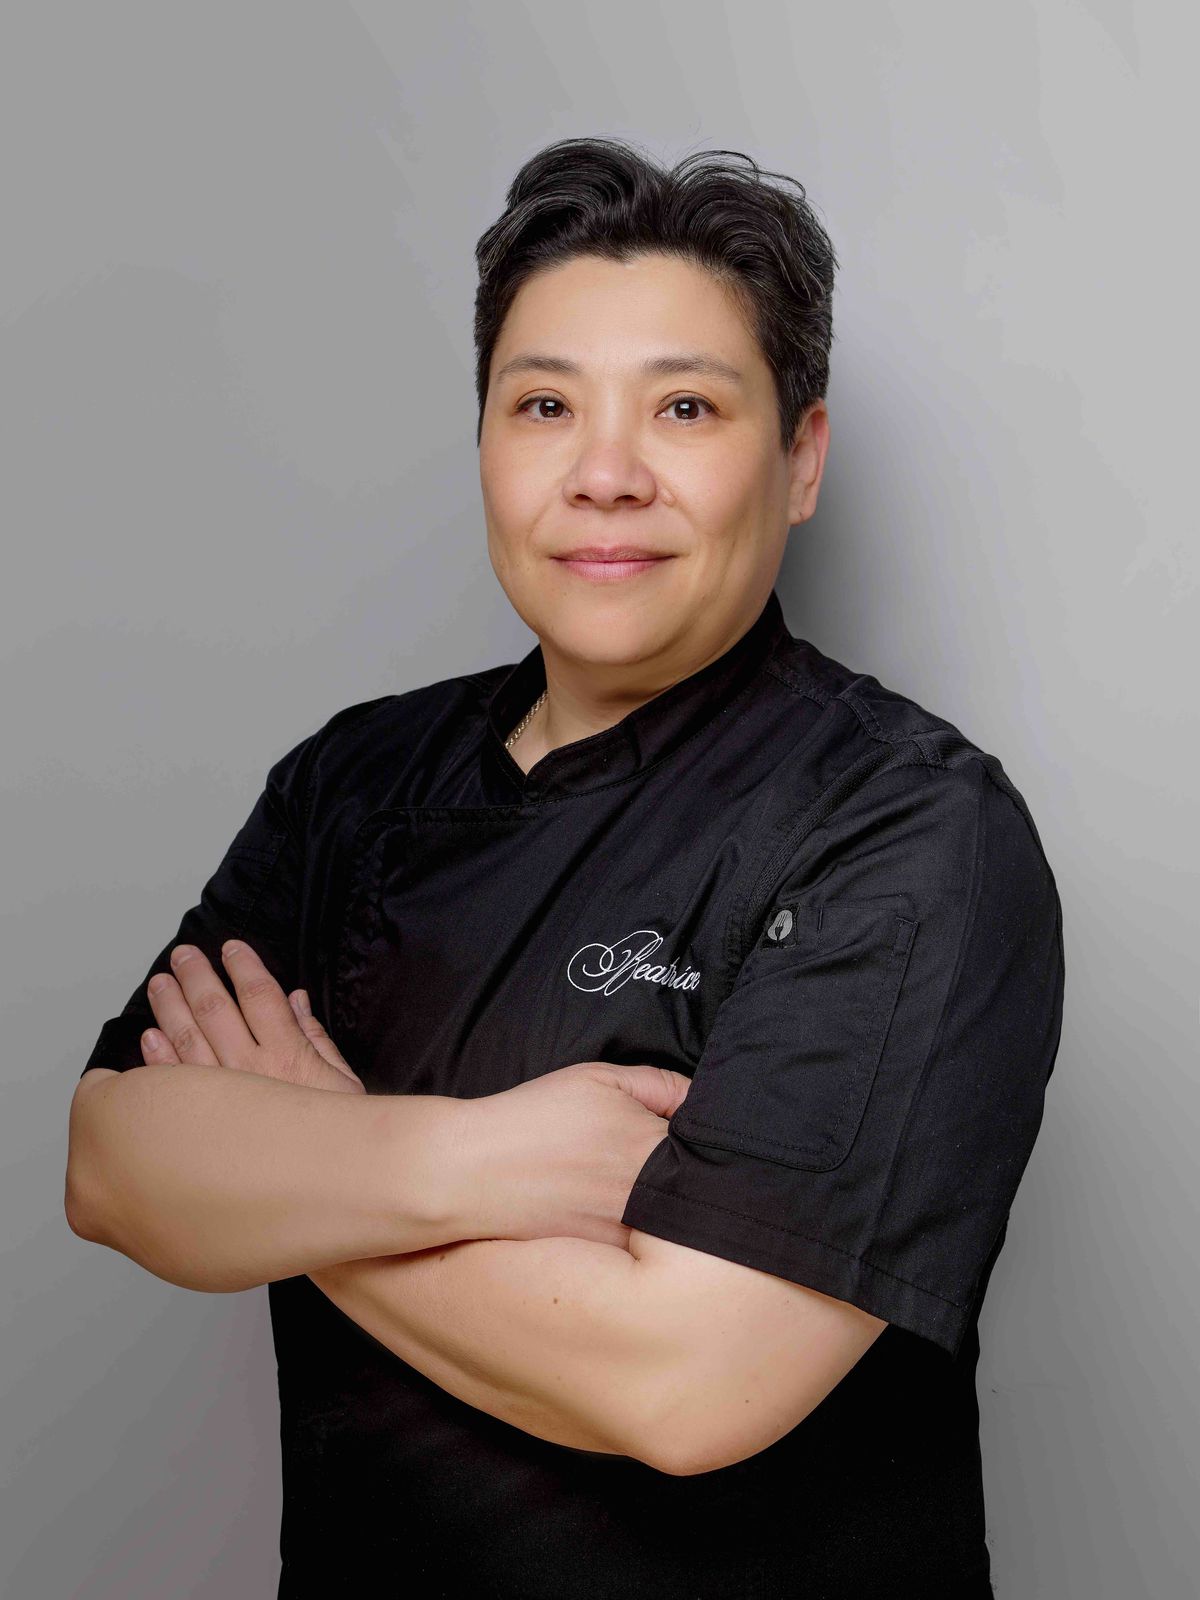 A woman stands in a short sleeved, black chef’s top, with Beatrice embroidered on it in white.